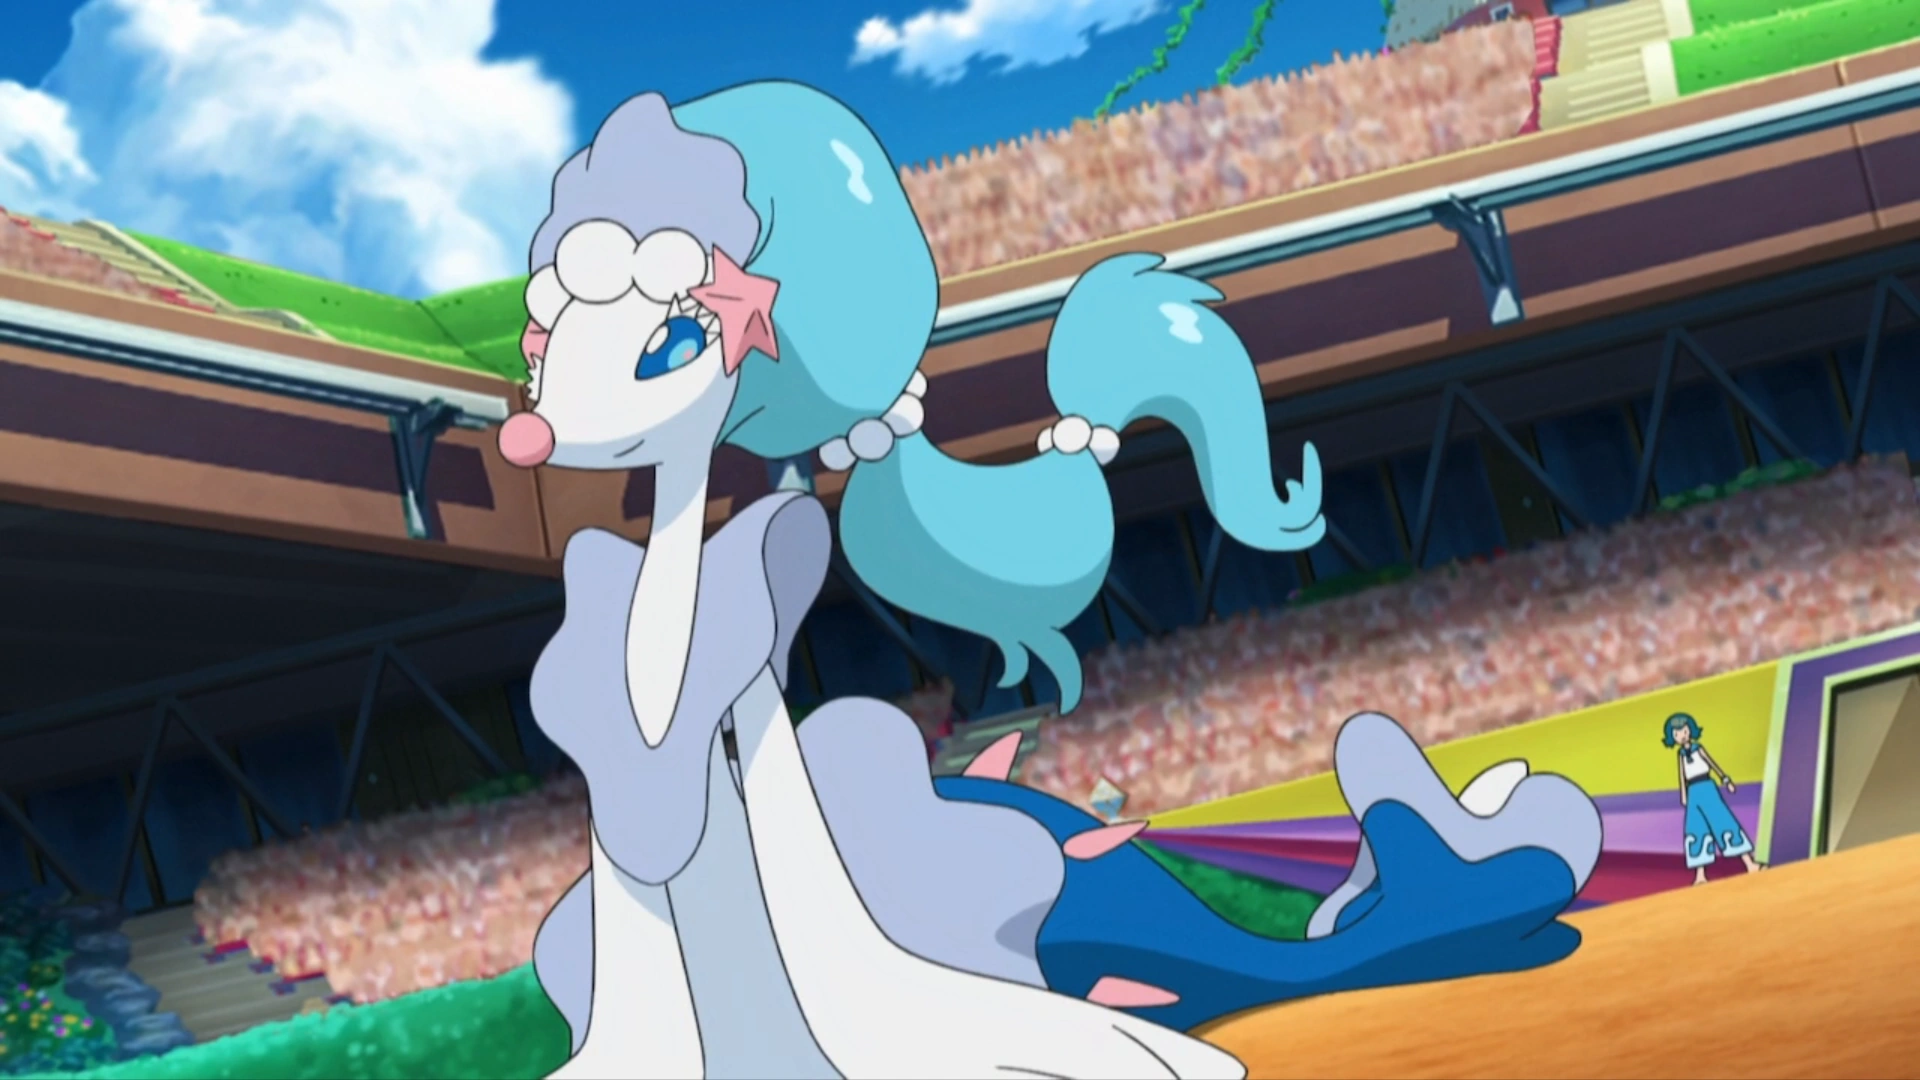 15 Facts About Primarina - Facts.net